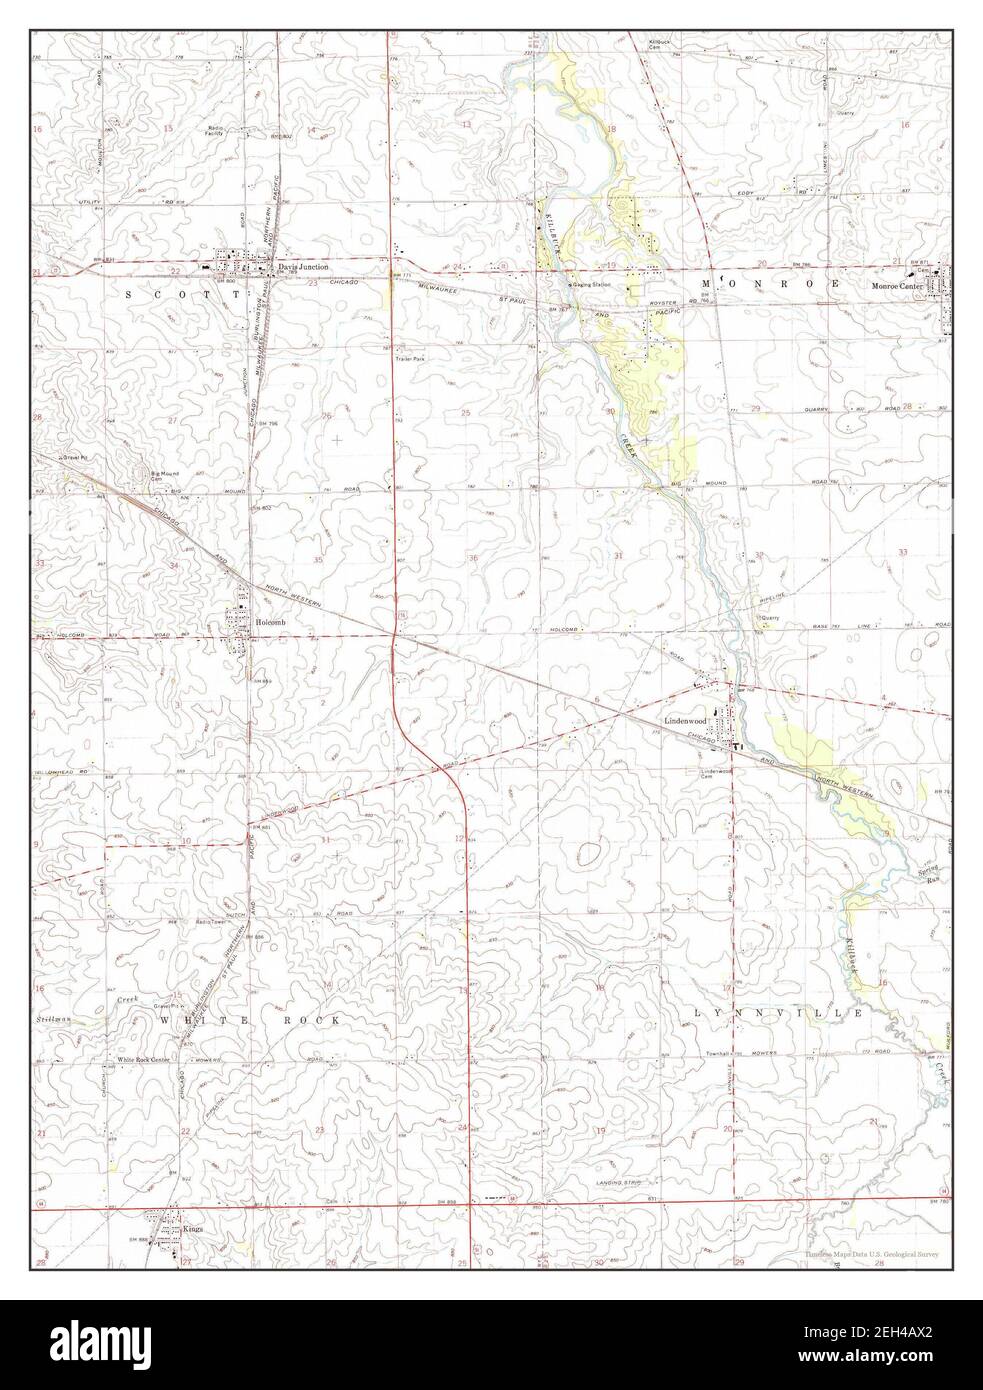 Kings, Illinois, map 1971, 1:24000, United States of America by Timeless Maps, data U.S. Geological Survey Stock Photo